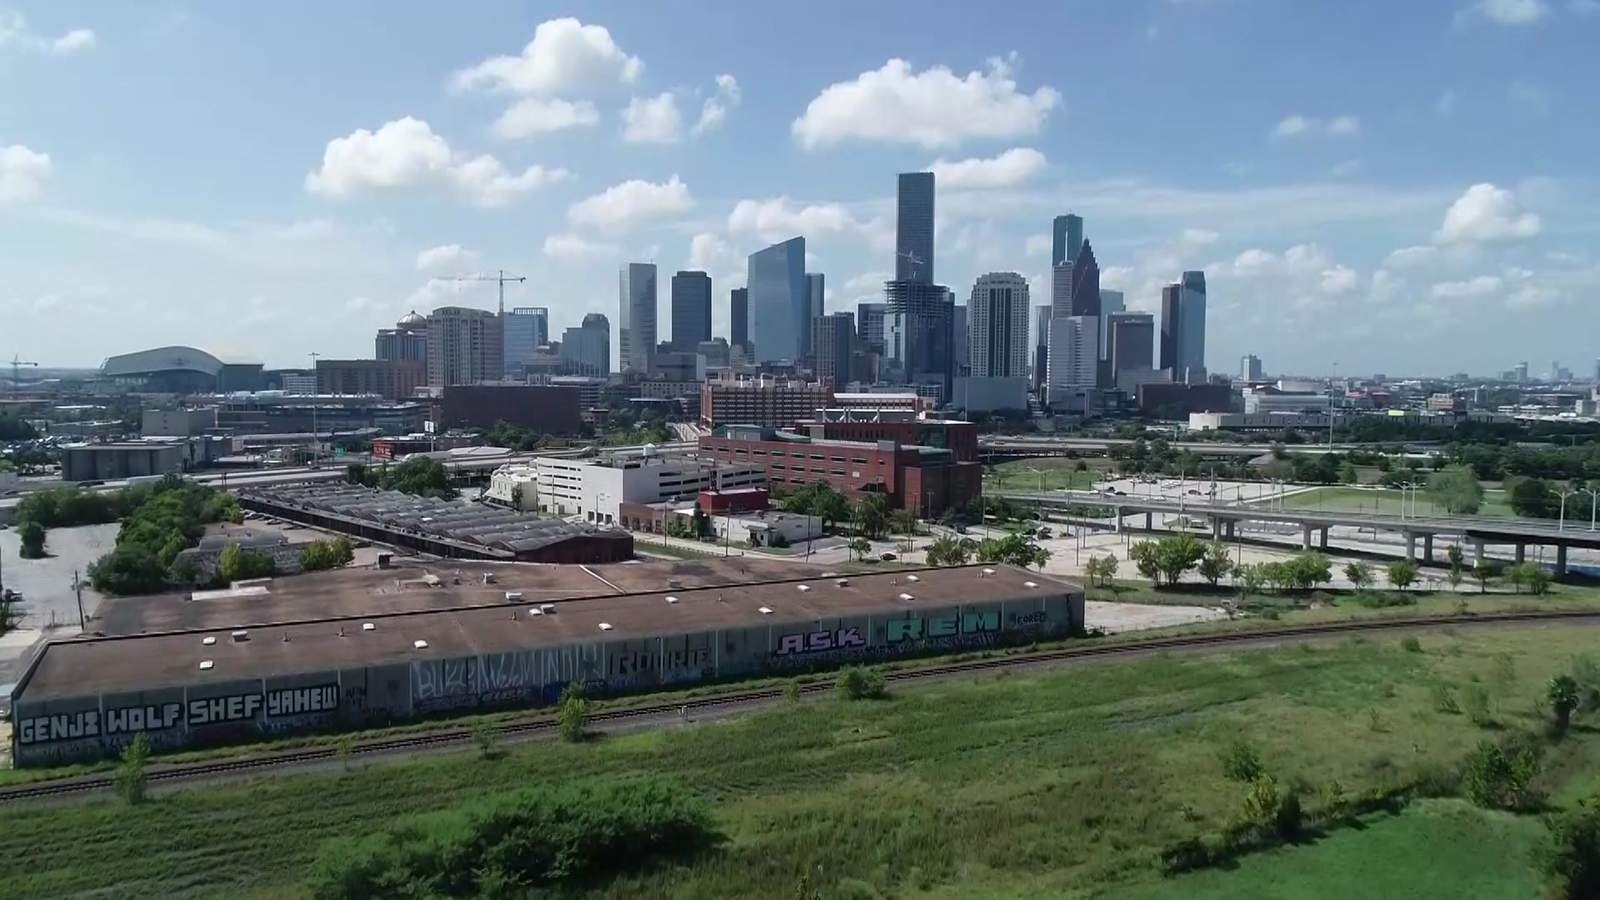 Ask 2: Is the Heights the most elevated area in Houston?